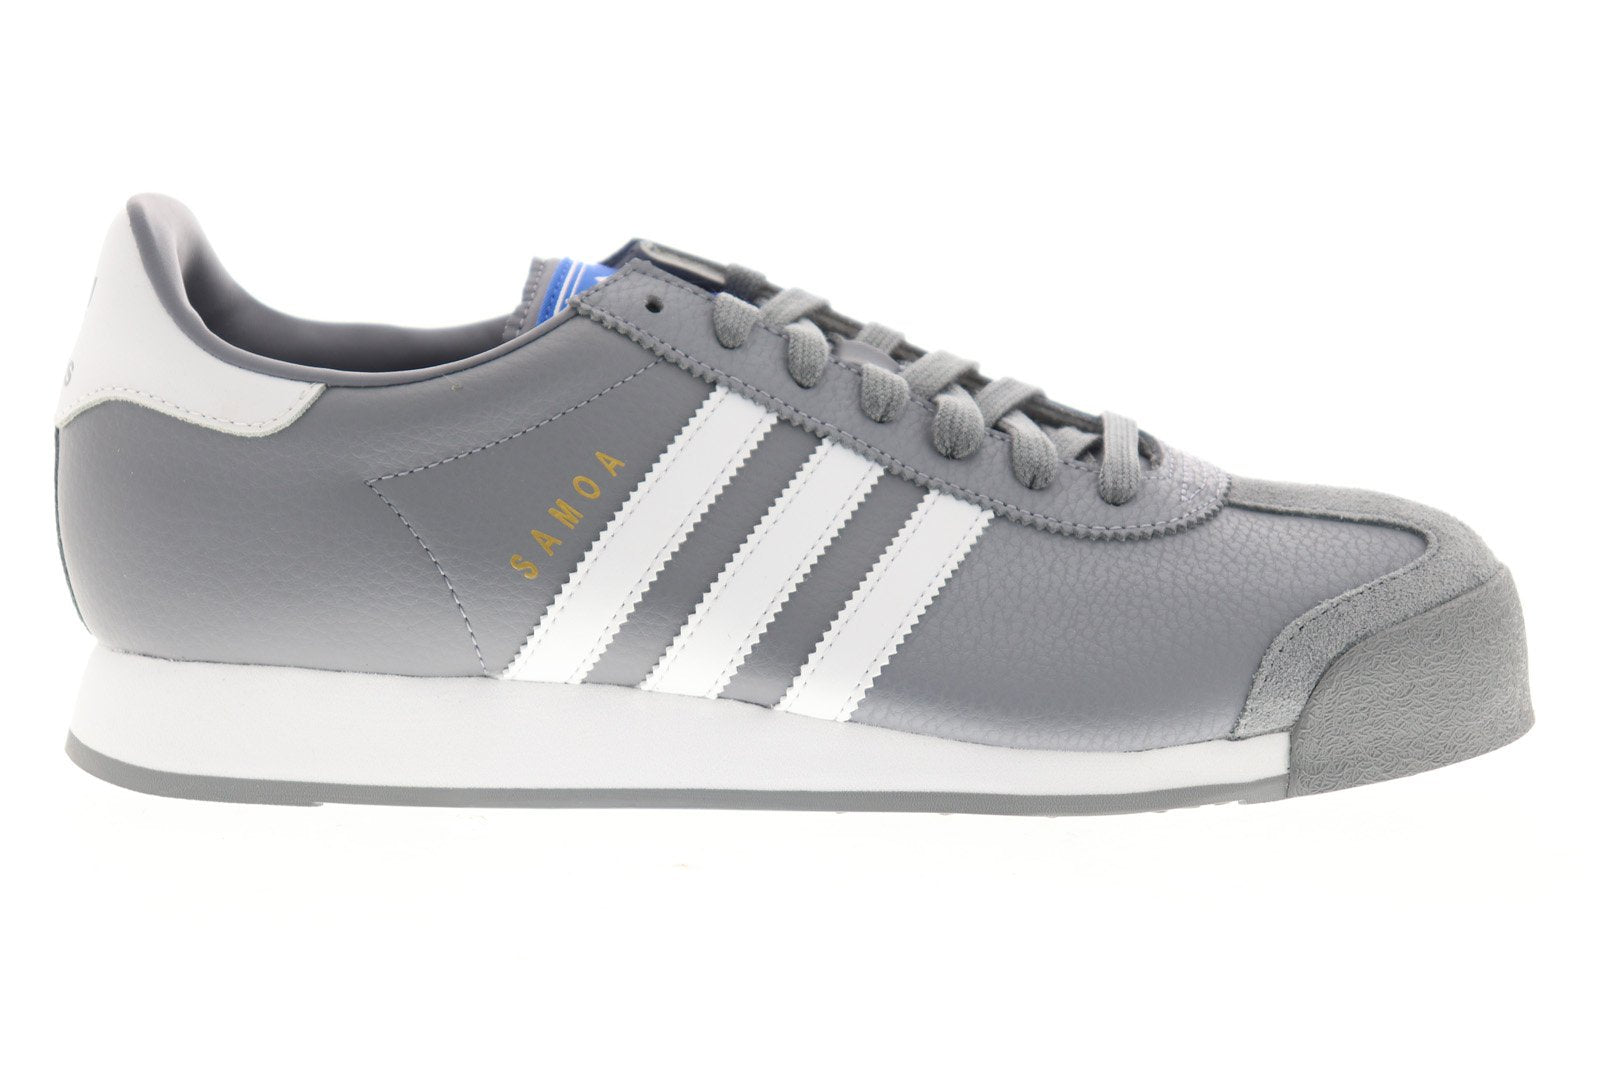 Adidas Samoa EG1576 Mens Gray Low Top Lace Up Lifestyle Sneakers Shoes - Ruze